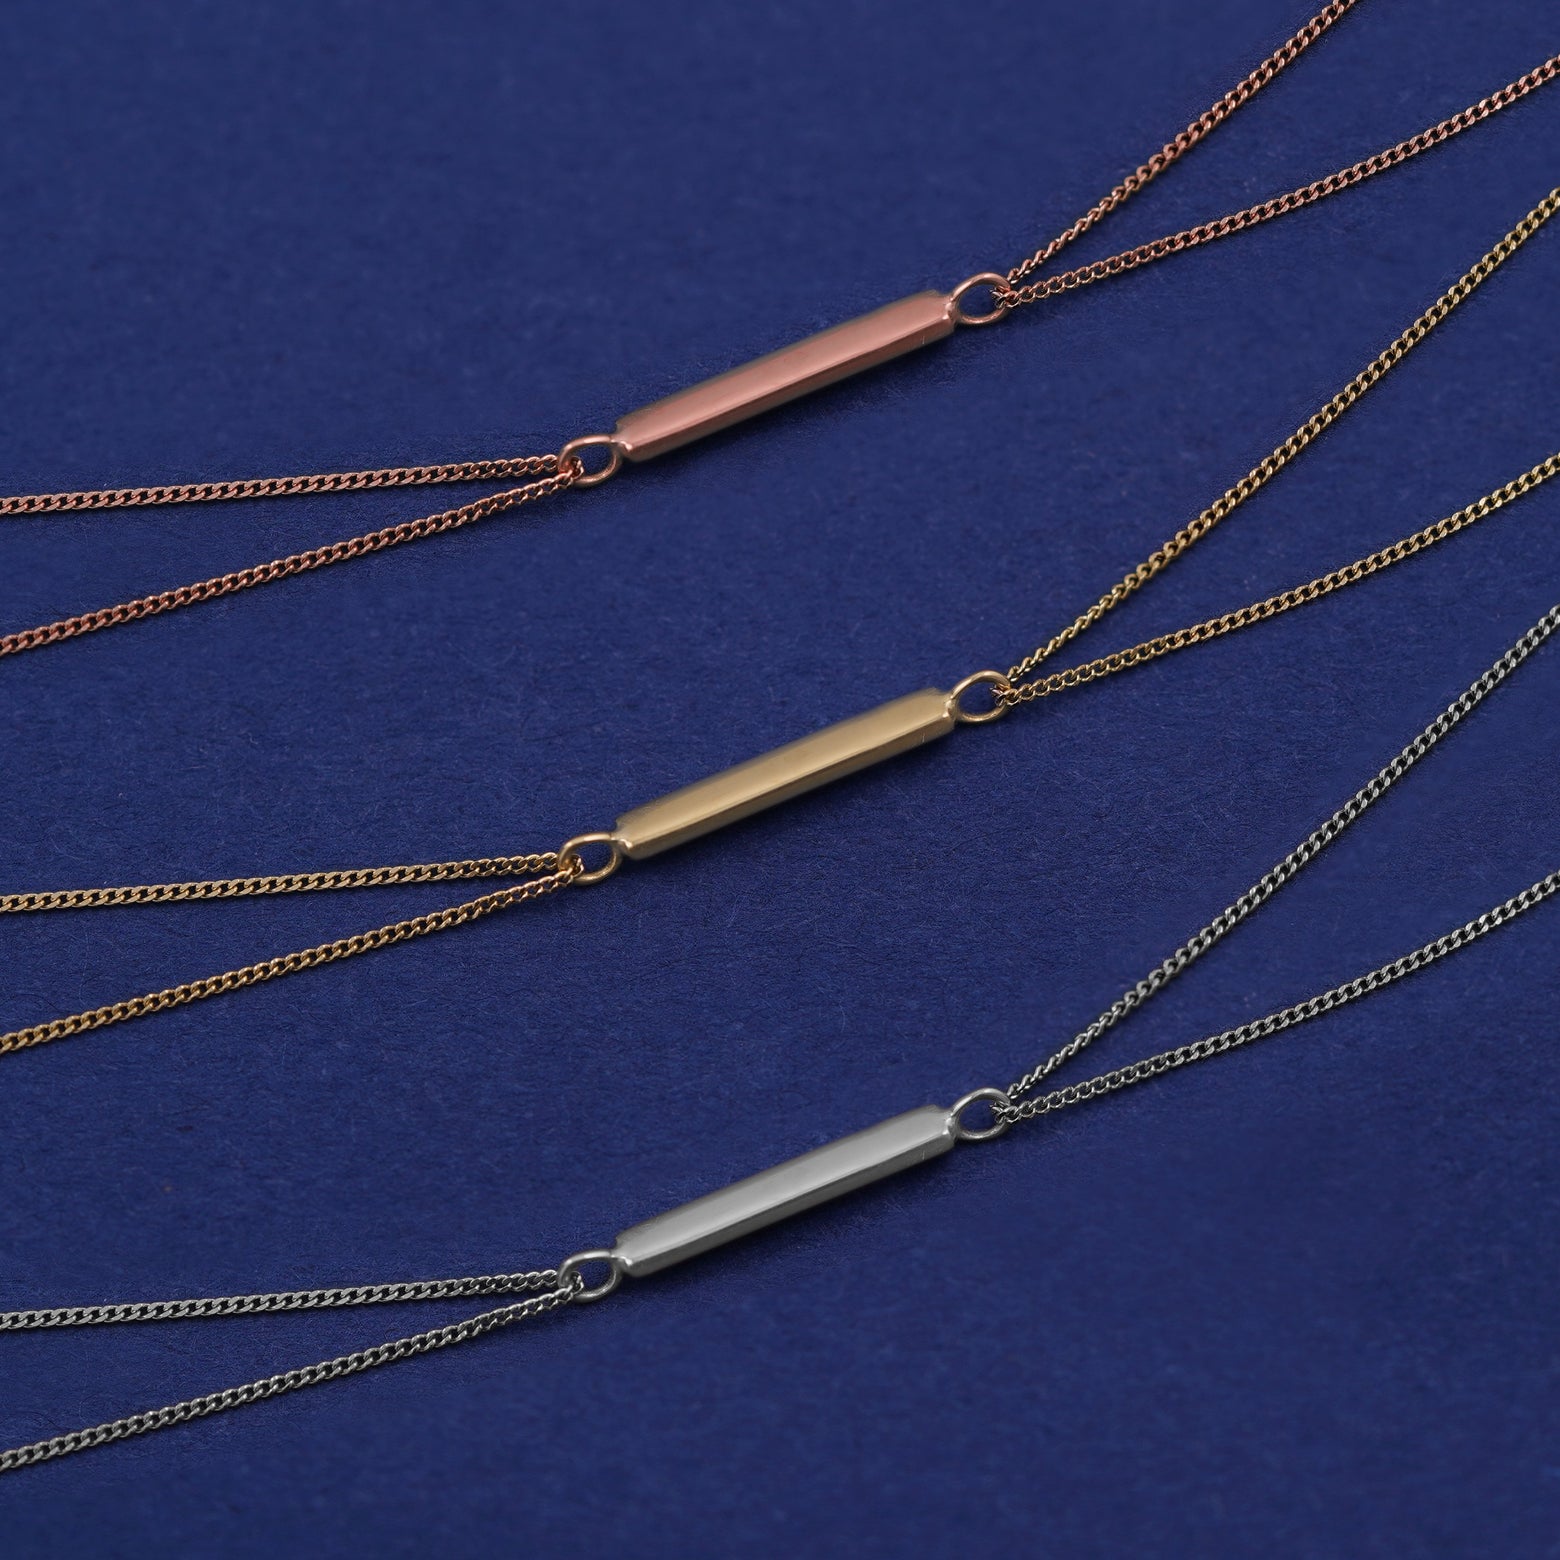 Three Bar Bracelets shown in options of rose, yellow, and white gold